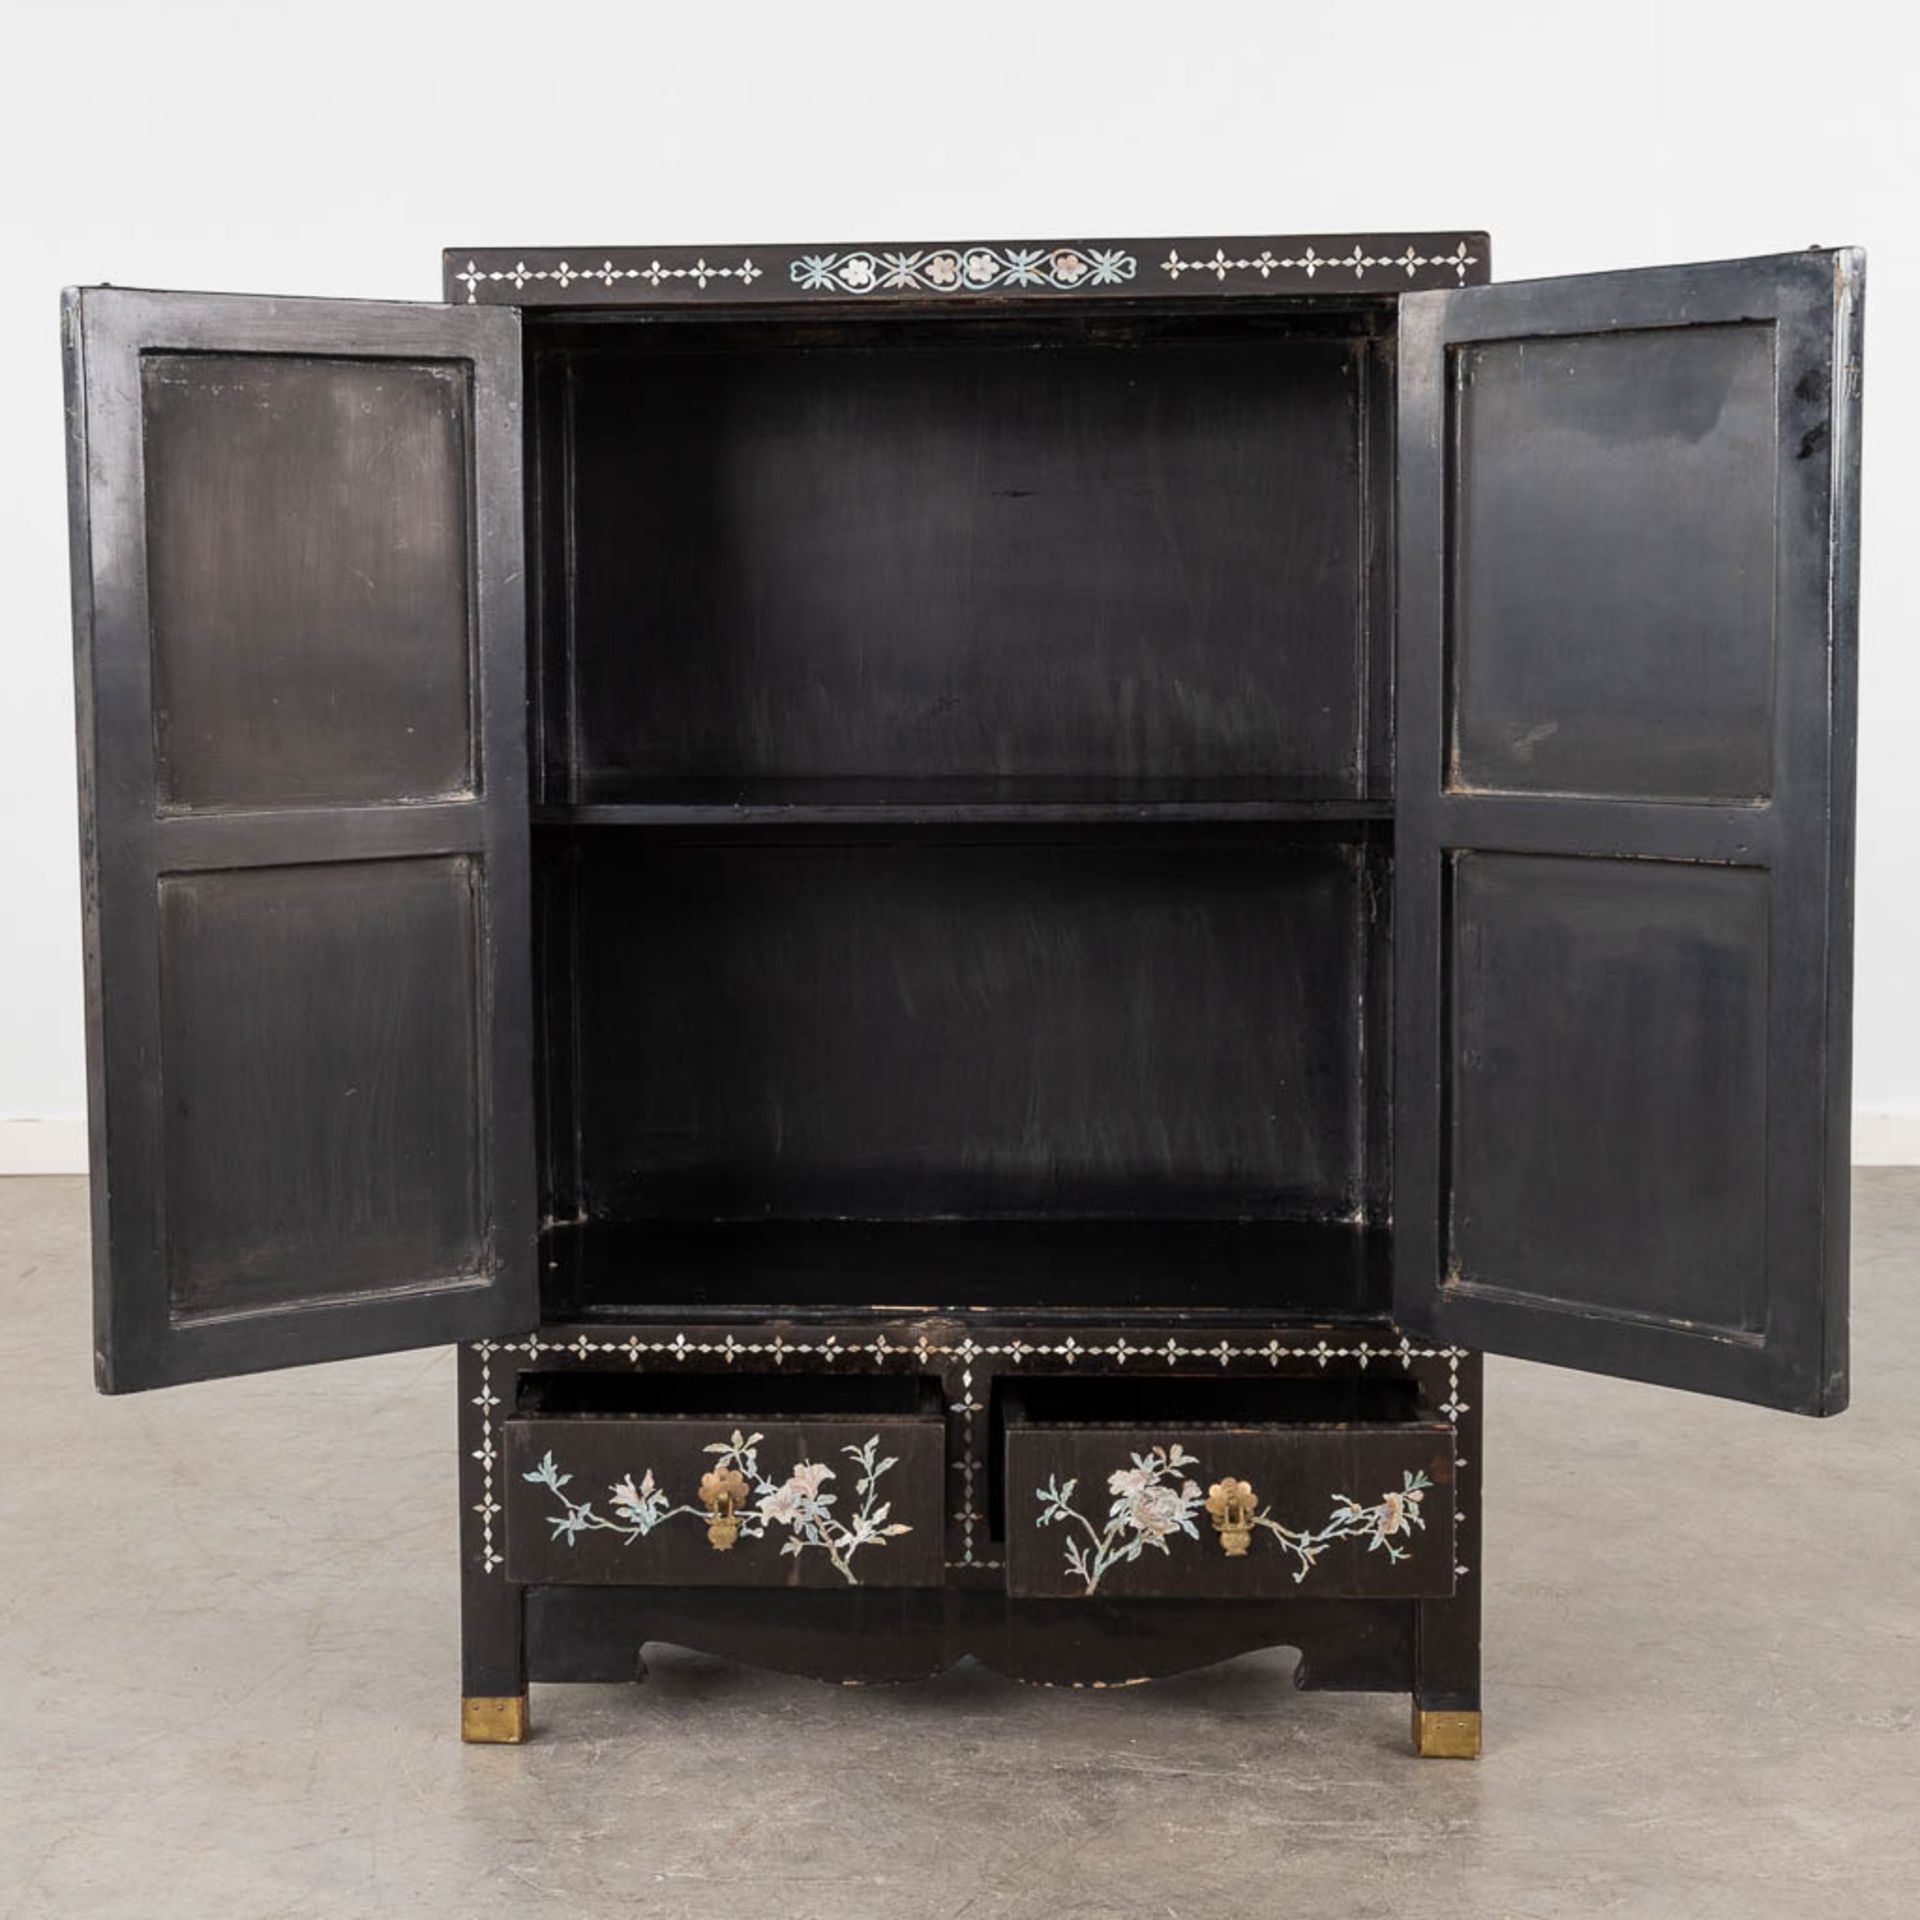 A Chinoiserie cabinet, mother of pearl inlay in ebonised wood. 20th C. (D:31 x W:61 x H:92 cm) - Image 5 of 14